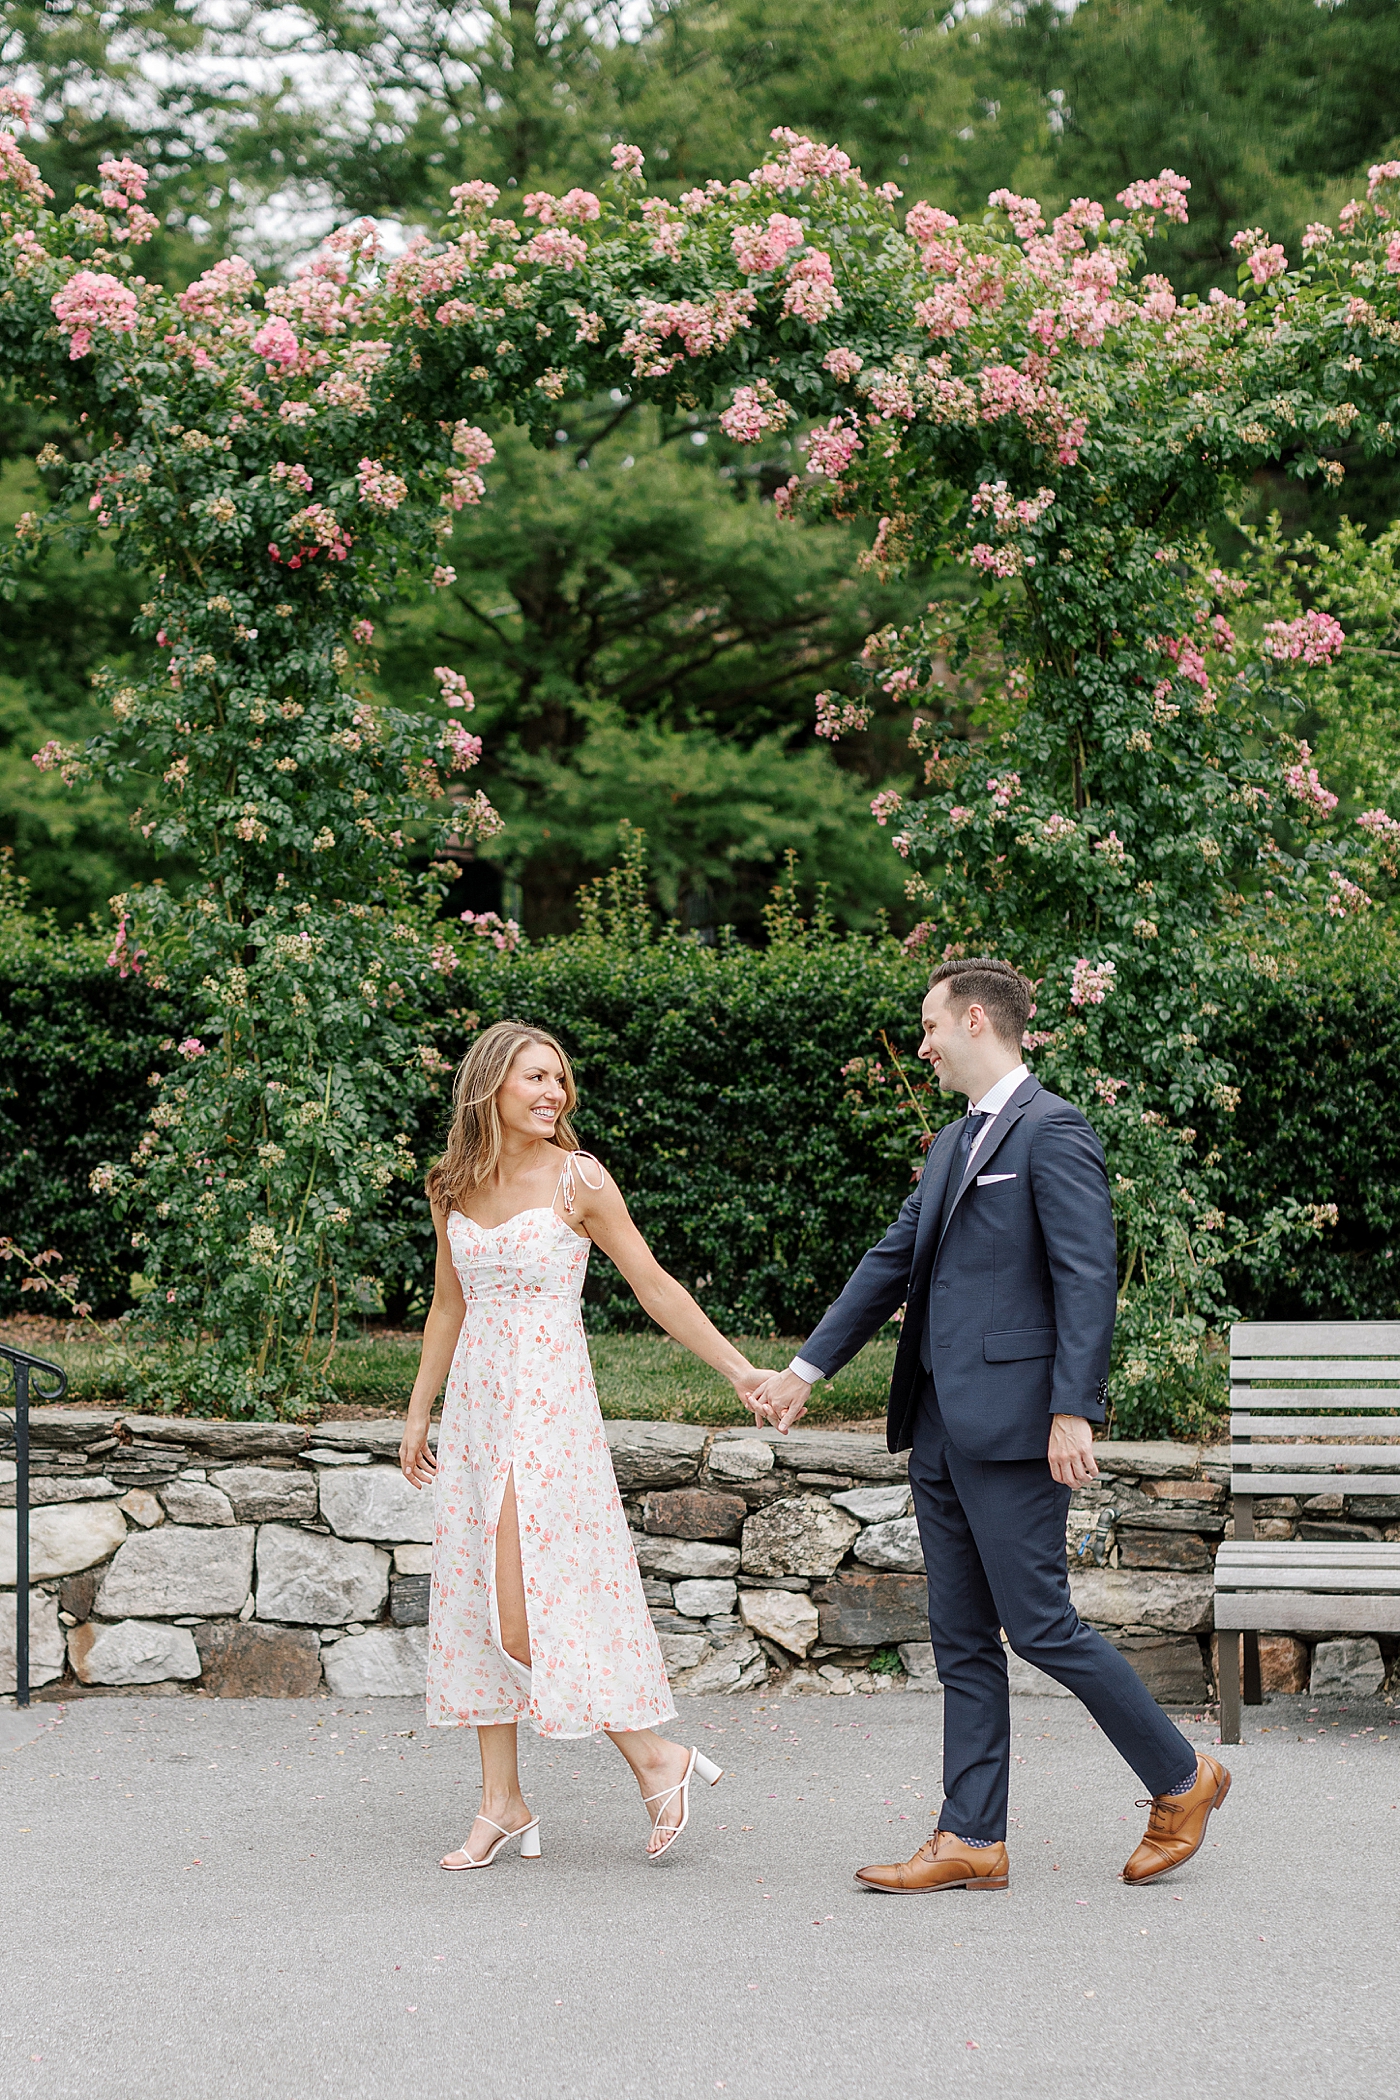 Couple laughing together while holding hands | Photo by Hope Helmuth Photography